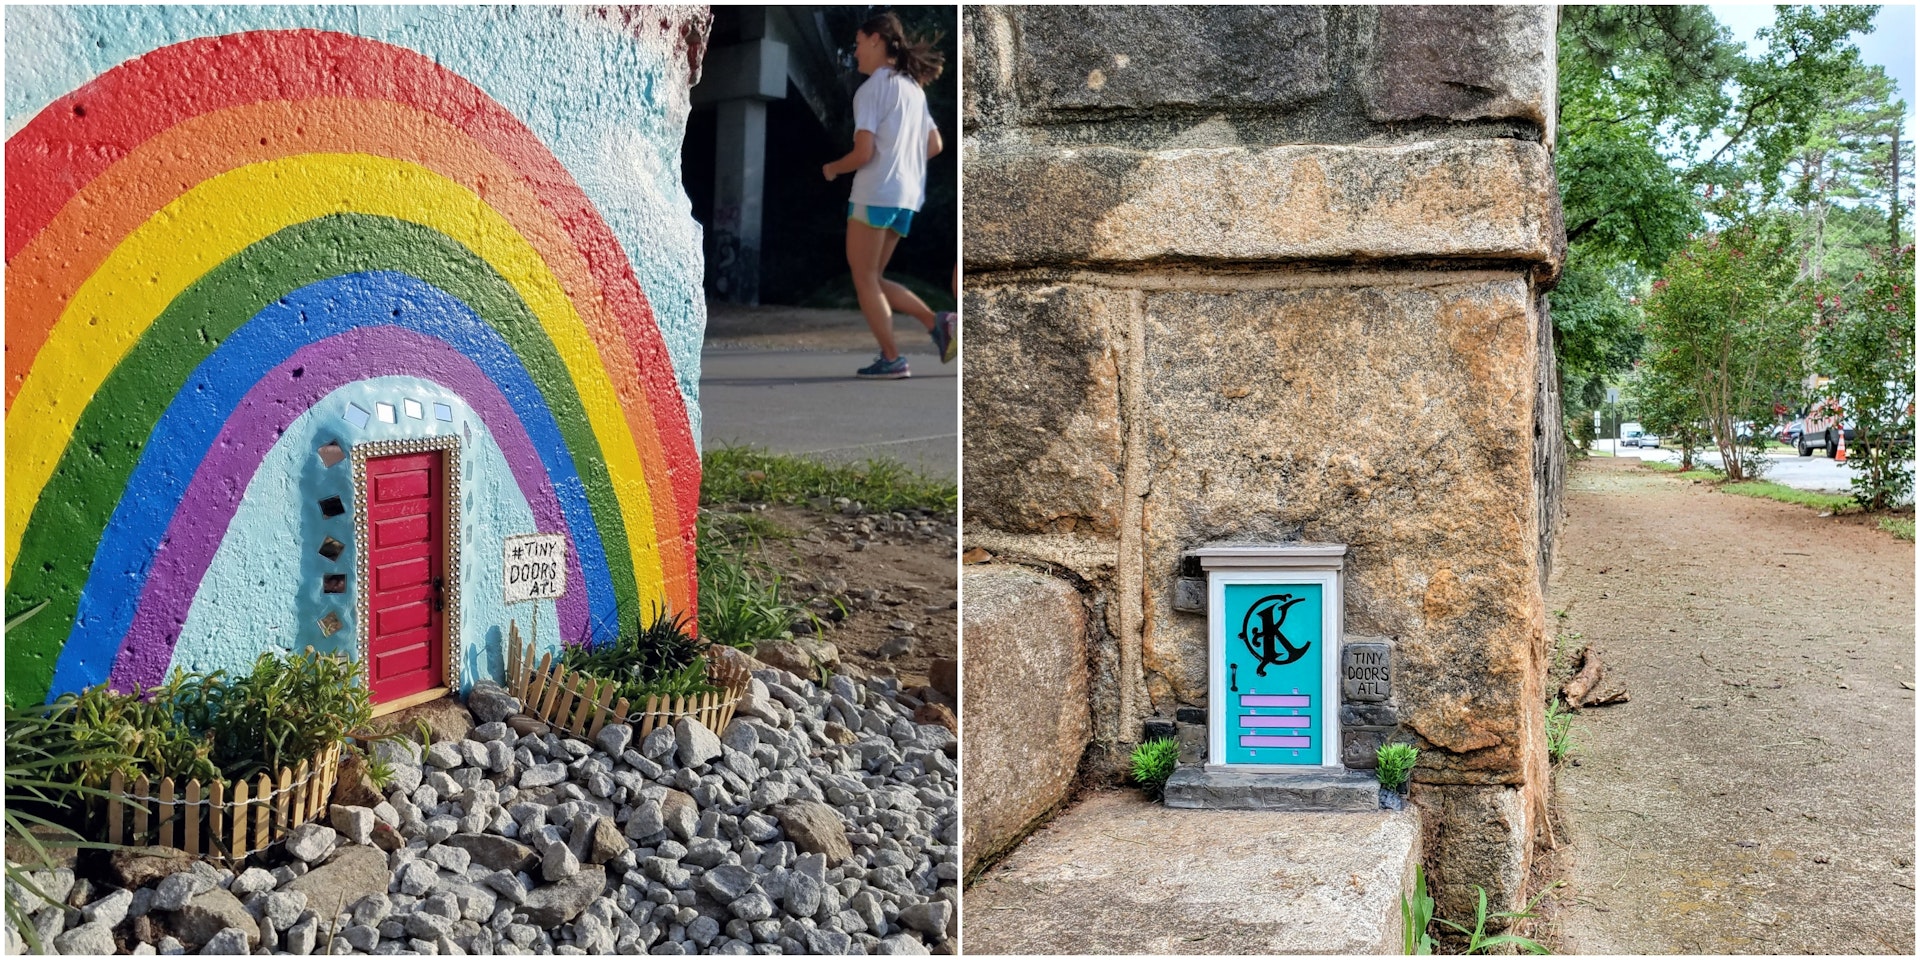 Two "tiny doors" by Tiny Doors ATL, in the BeltLine / Old 4th Ward (L) and Kirkwood (R), Atlanta, Georgia, USA